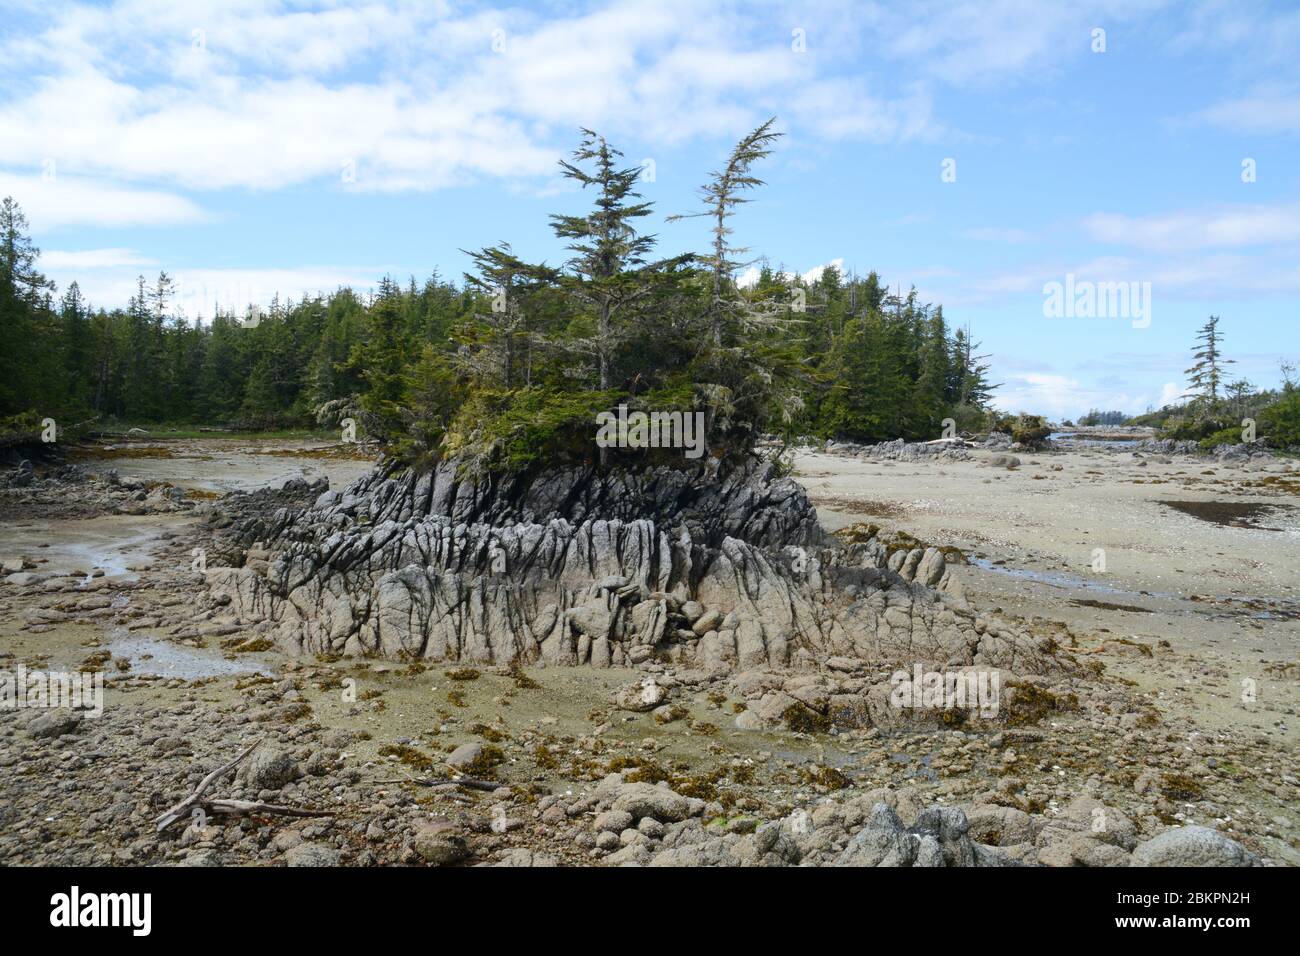 A Pacific Ocean islet and intertidal zone seabed exposed at low tide in the Great Bear Rainforest, central coast, British Columbia, Canada. Stock Photo